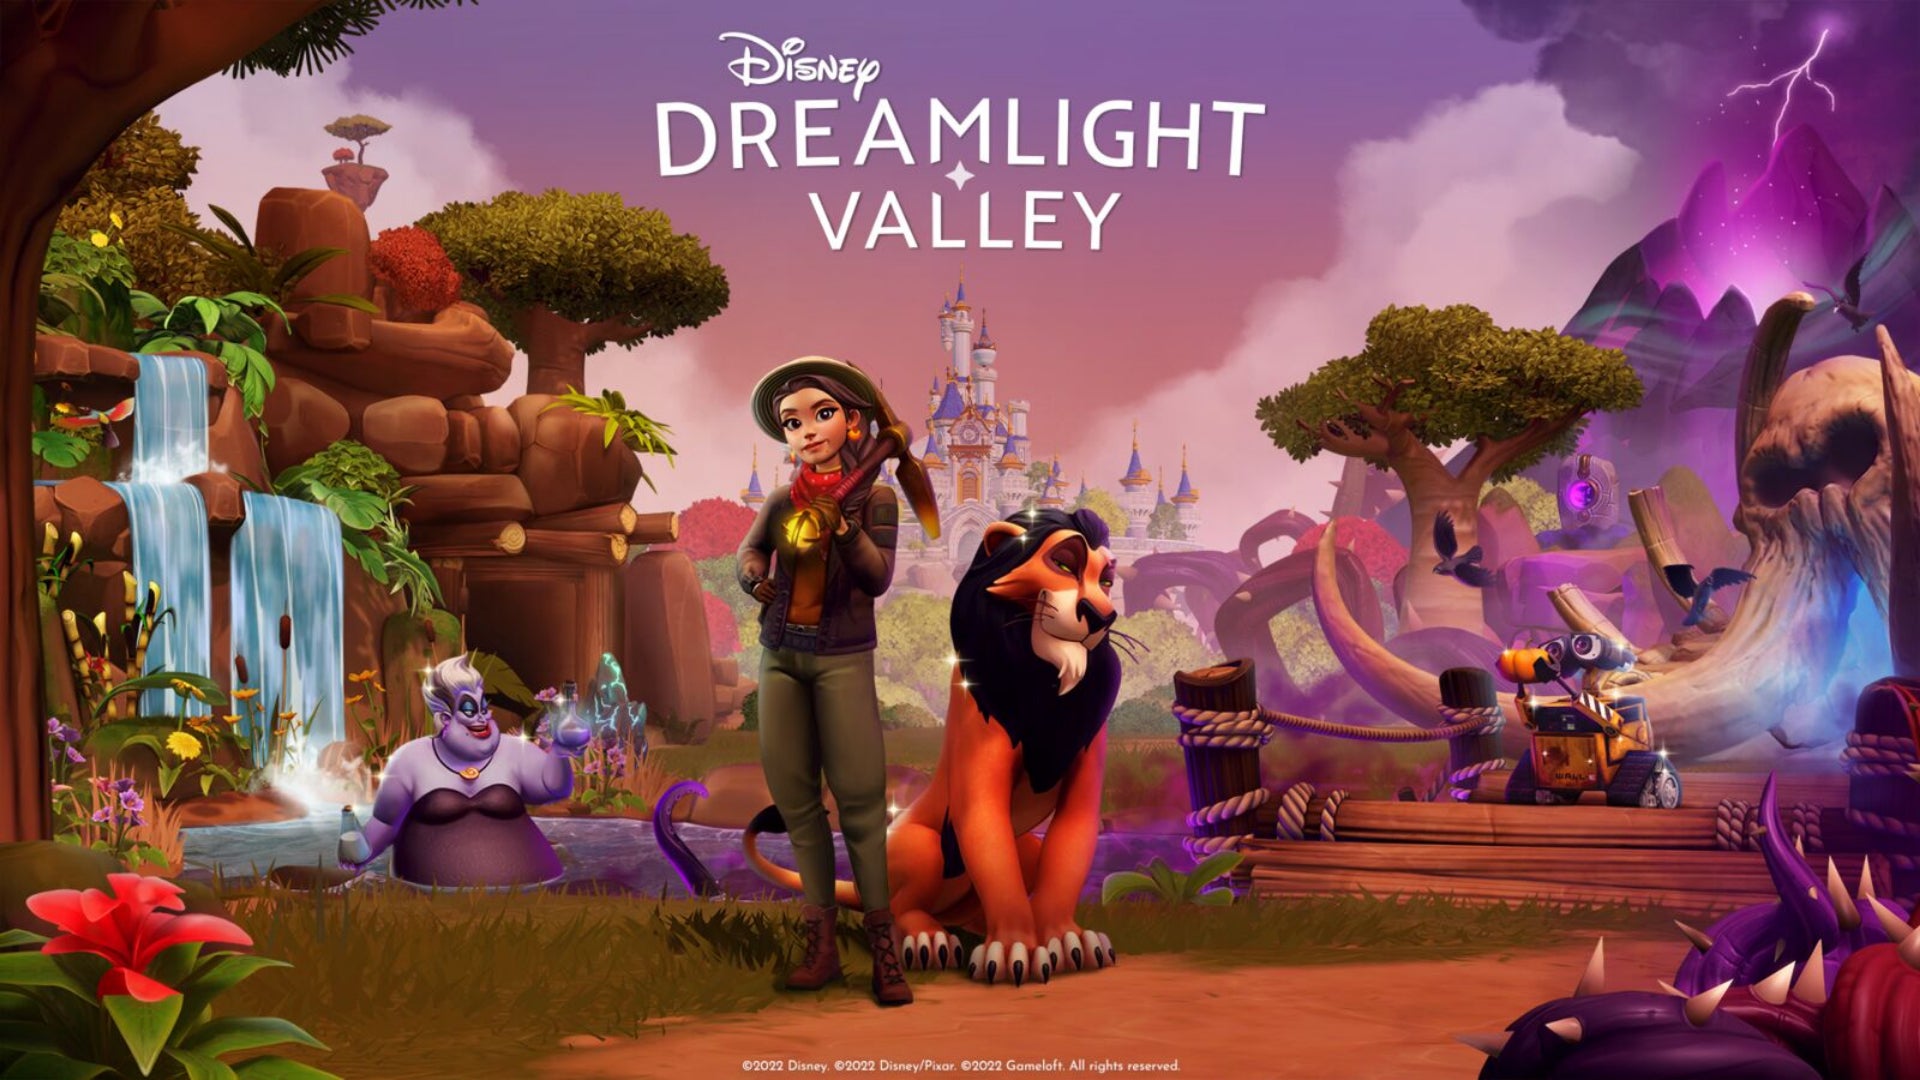 Image for Disney Dreamlight Valley’s first free major content update, Scar’s Kingdom, is now live